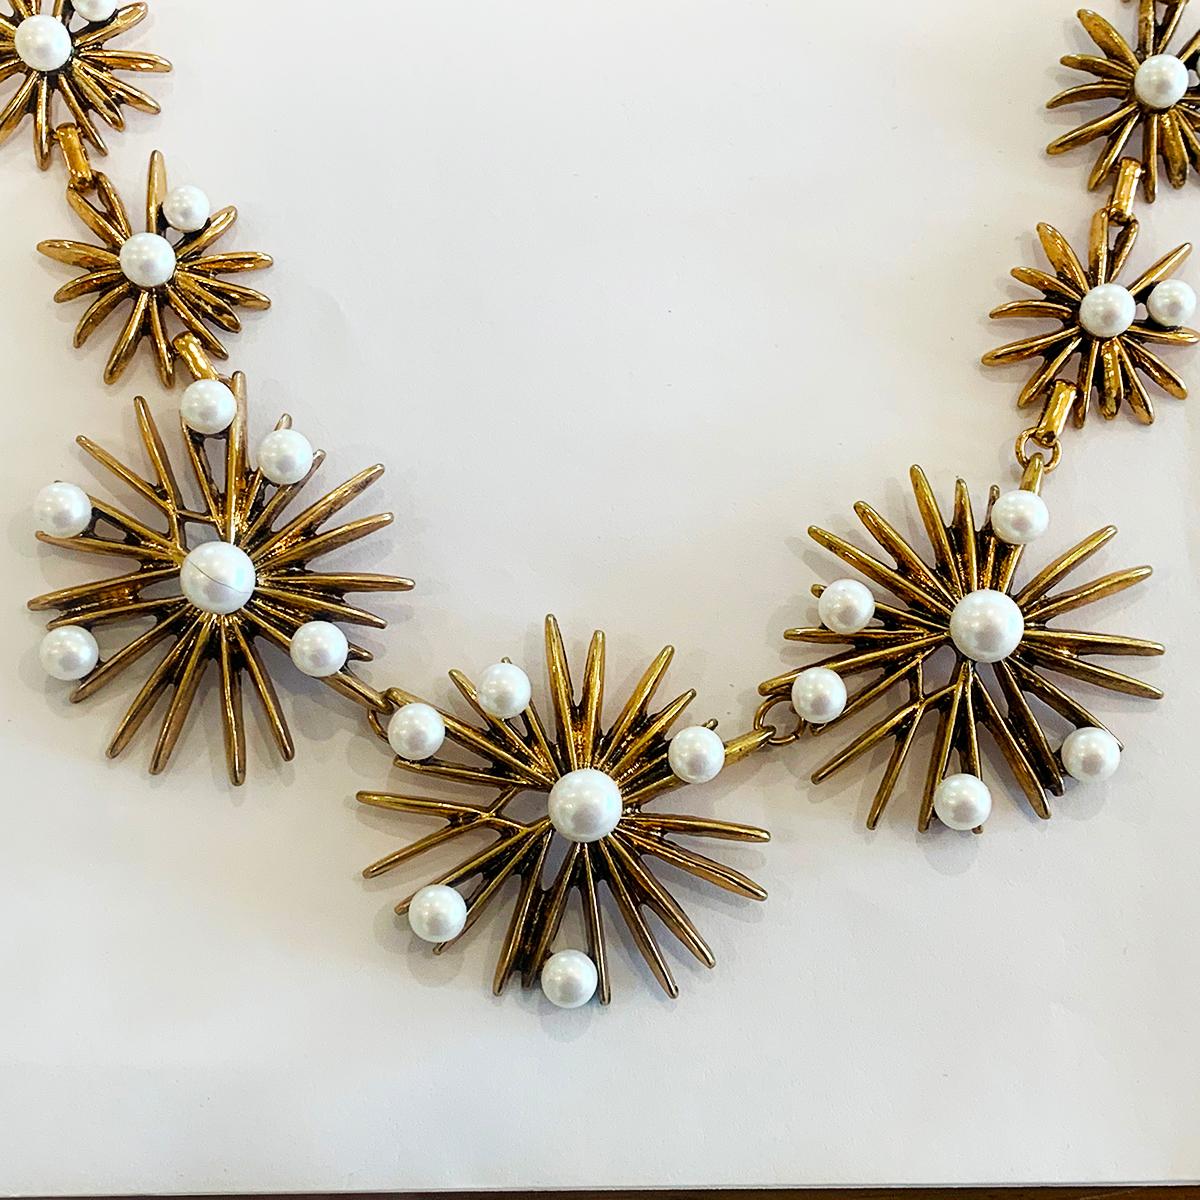 Authentic signed Oscar De La Renta starburst Necklace, in joined gilt stars of different sizes, highlighted with Faux Pearls also in varying diameters. All complete and perfect, Claw Clasp and the usual adjustable length having the Gilt tab Hallmark